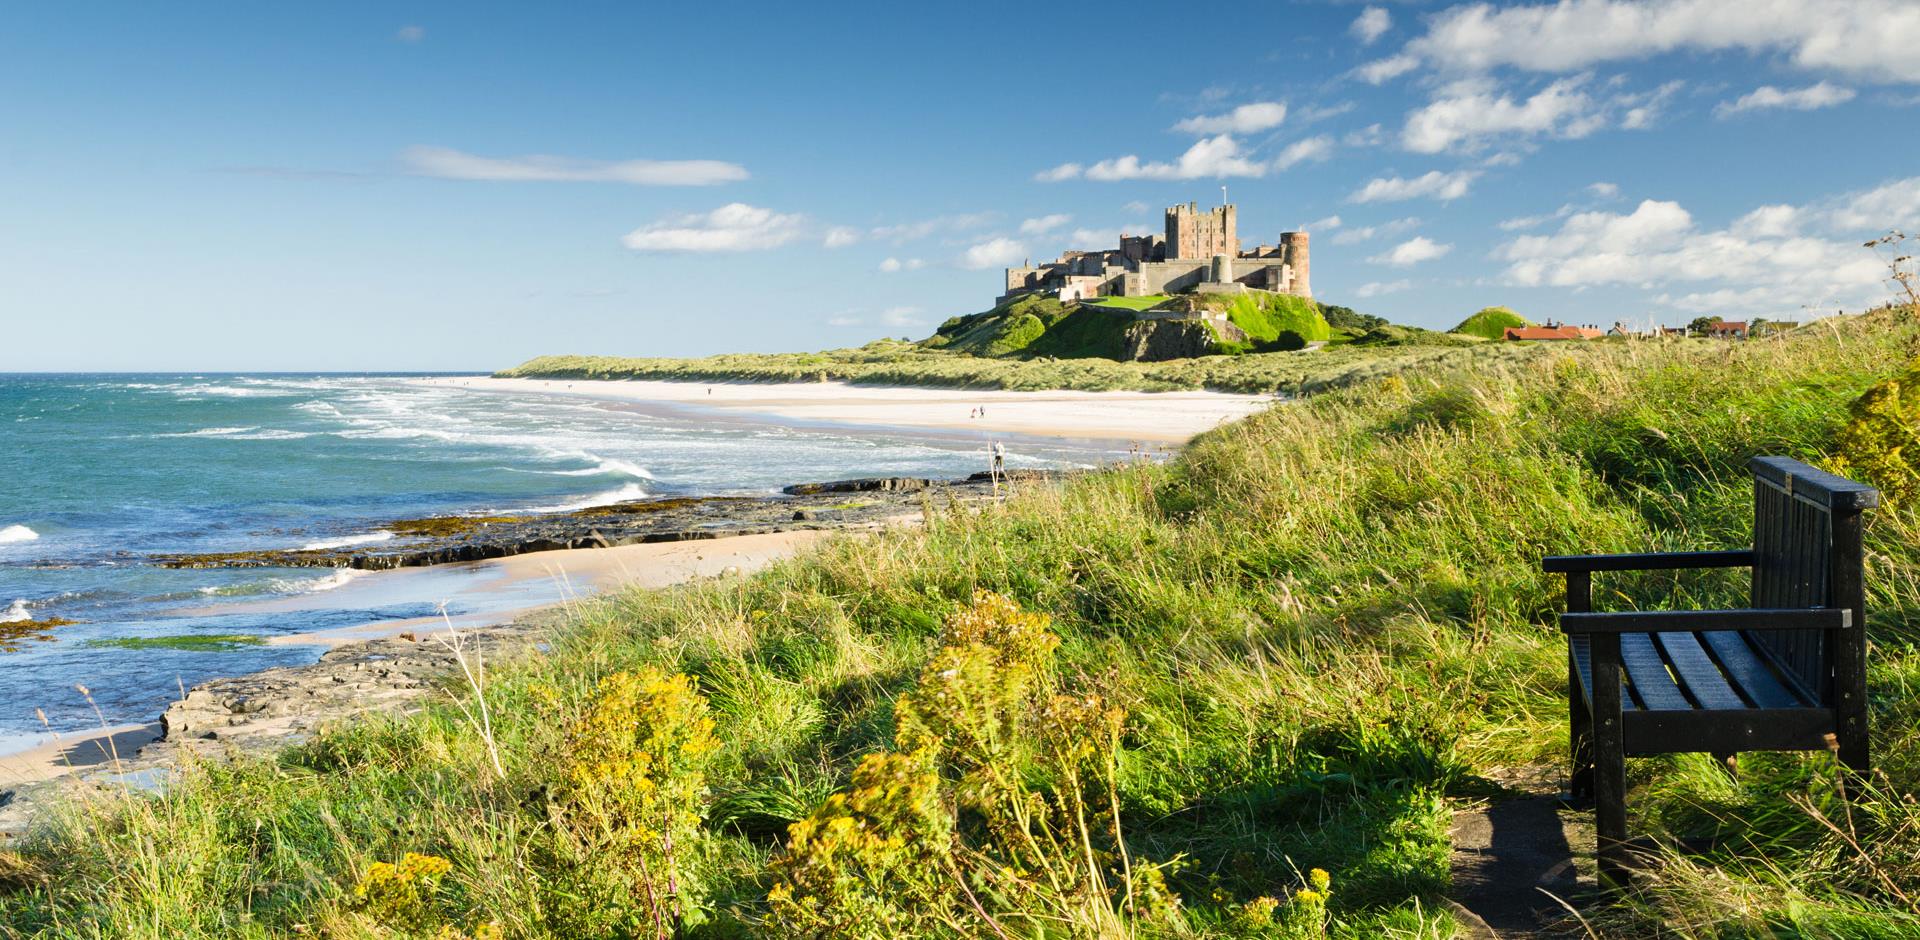 View from the beach of Bamburgh Castle in Northumberland